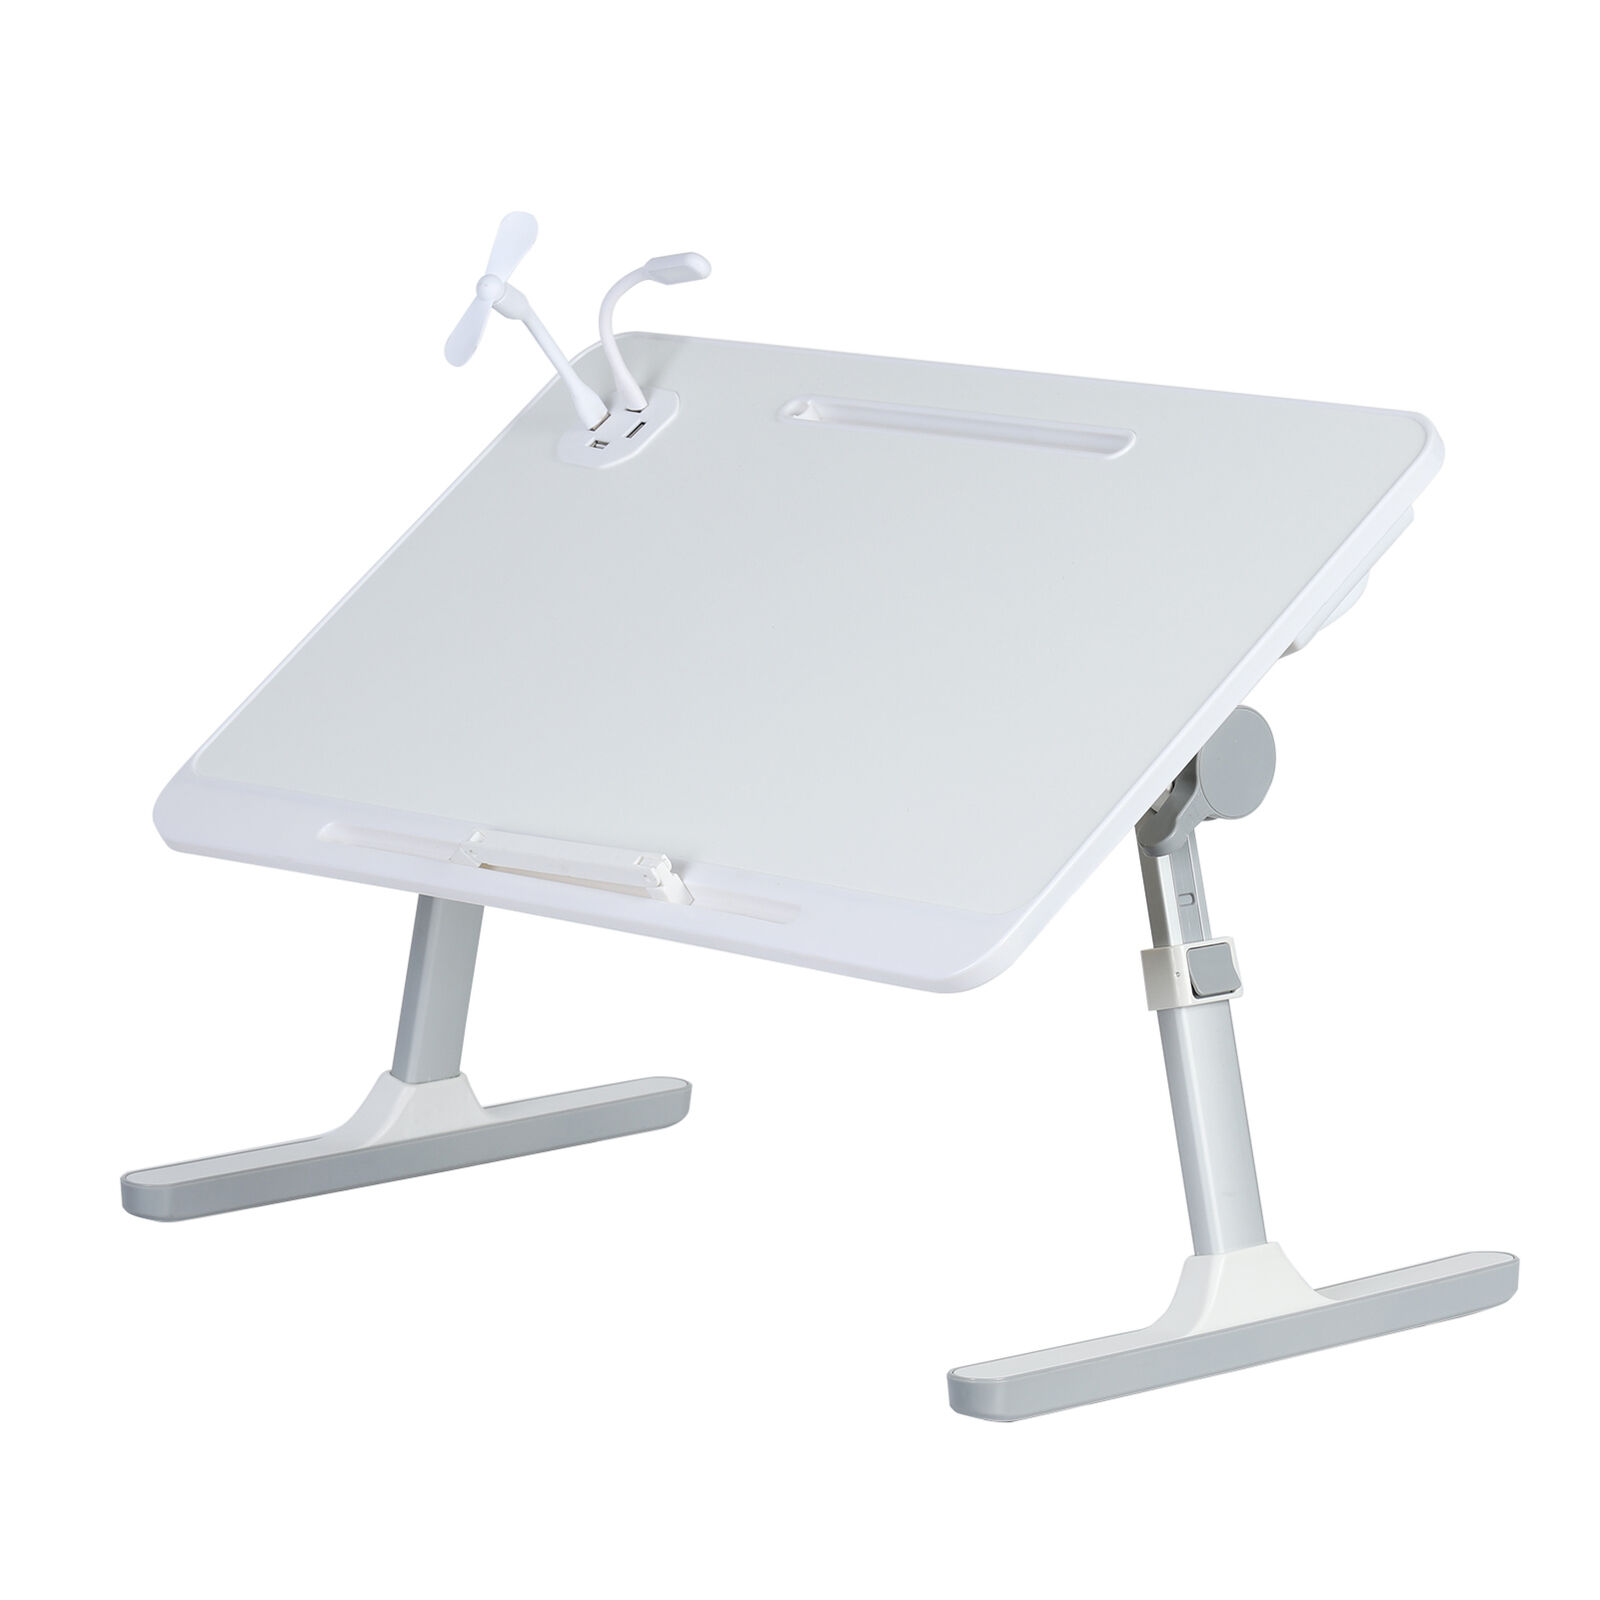 Height Adjustable Laptop Bed Tray Table,Portable Desk with Foldable Legs lf